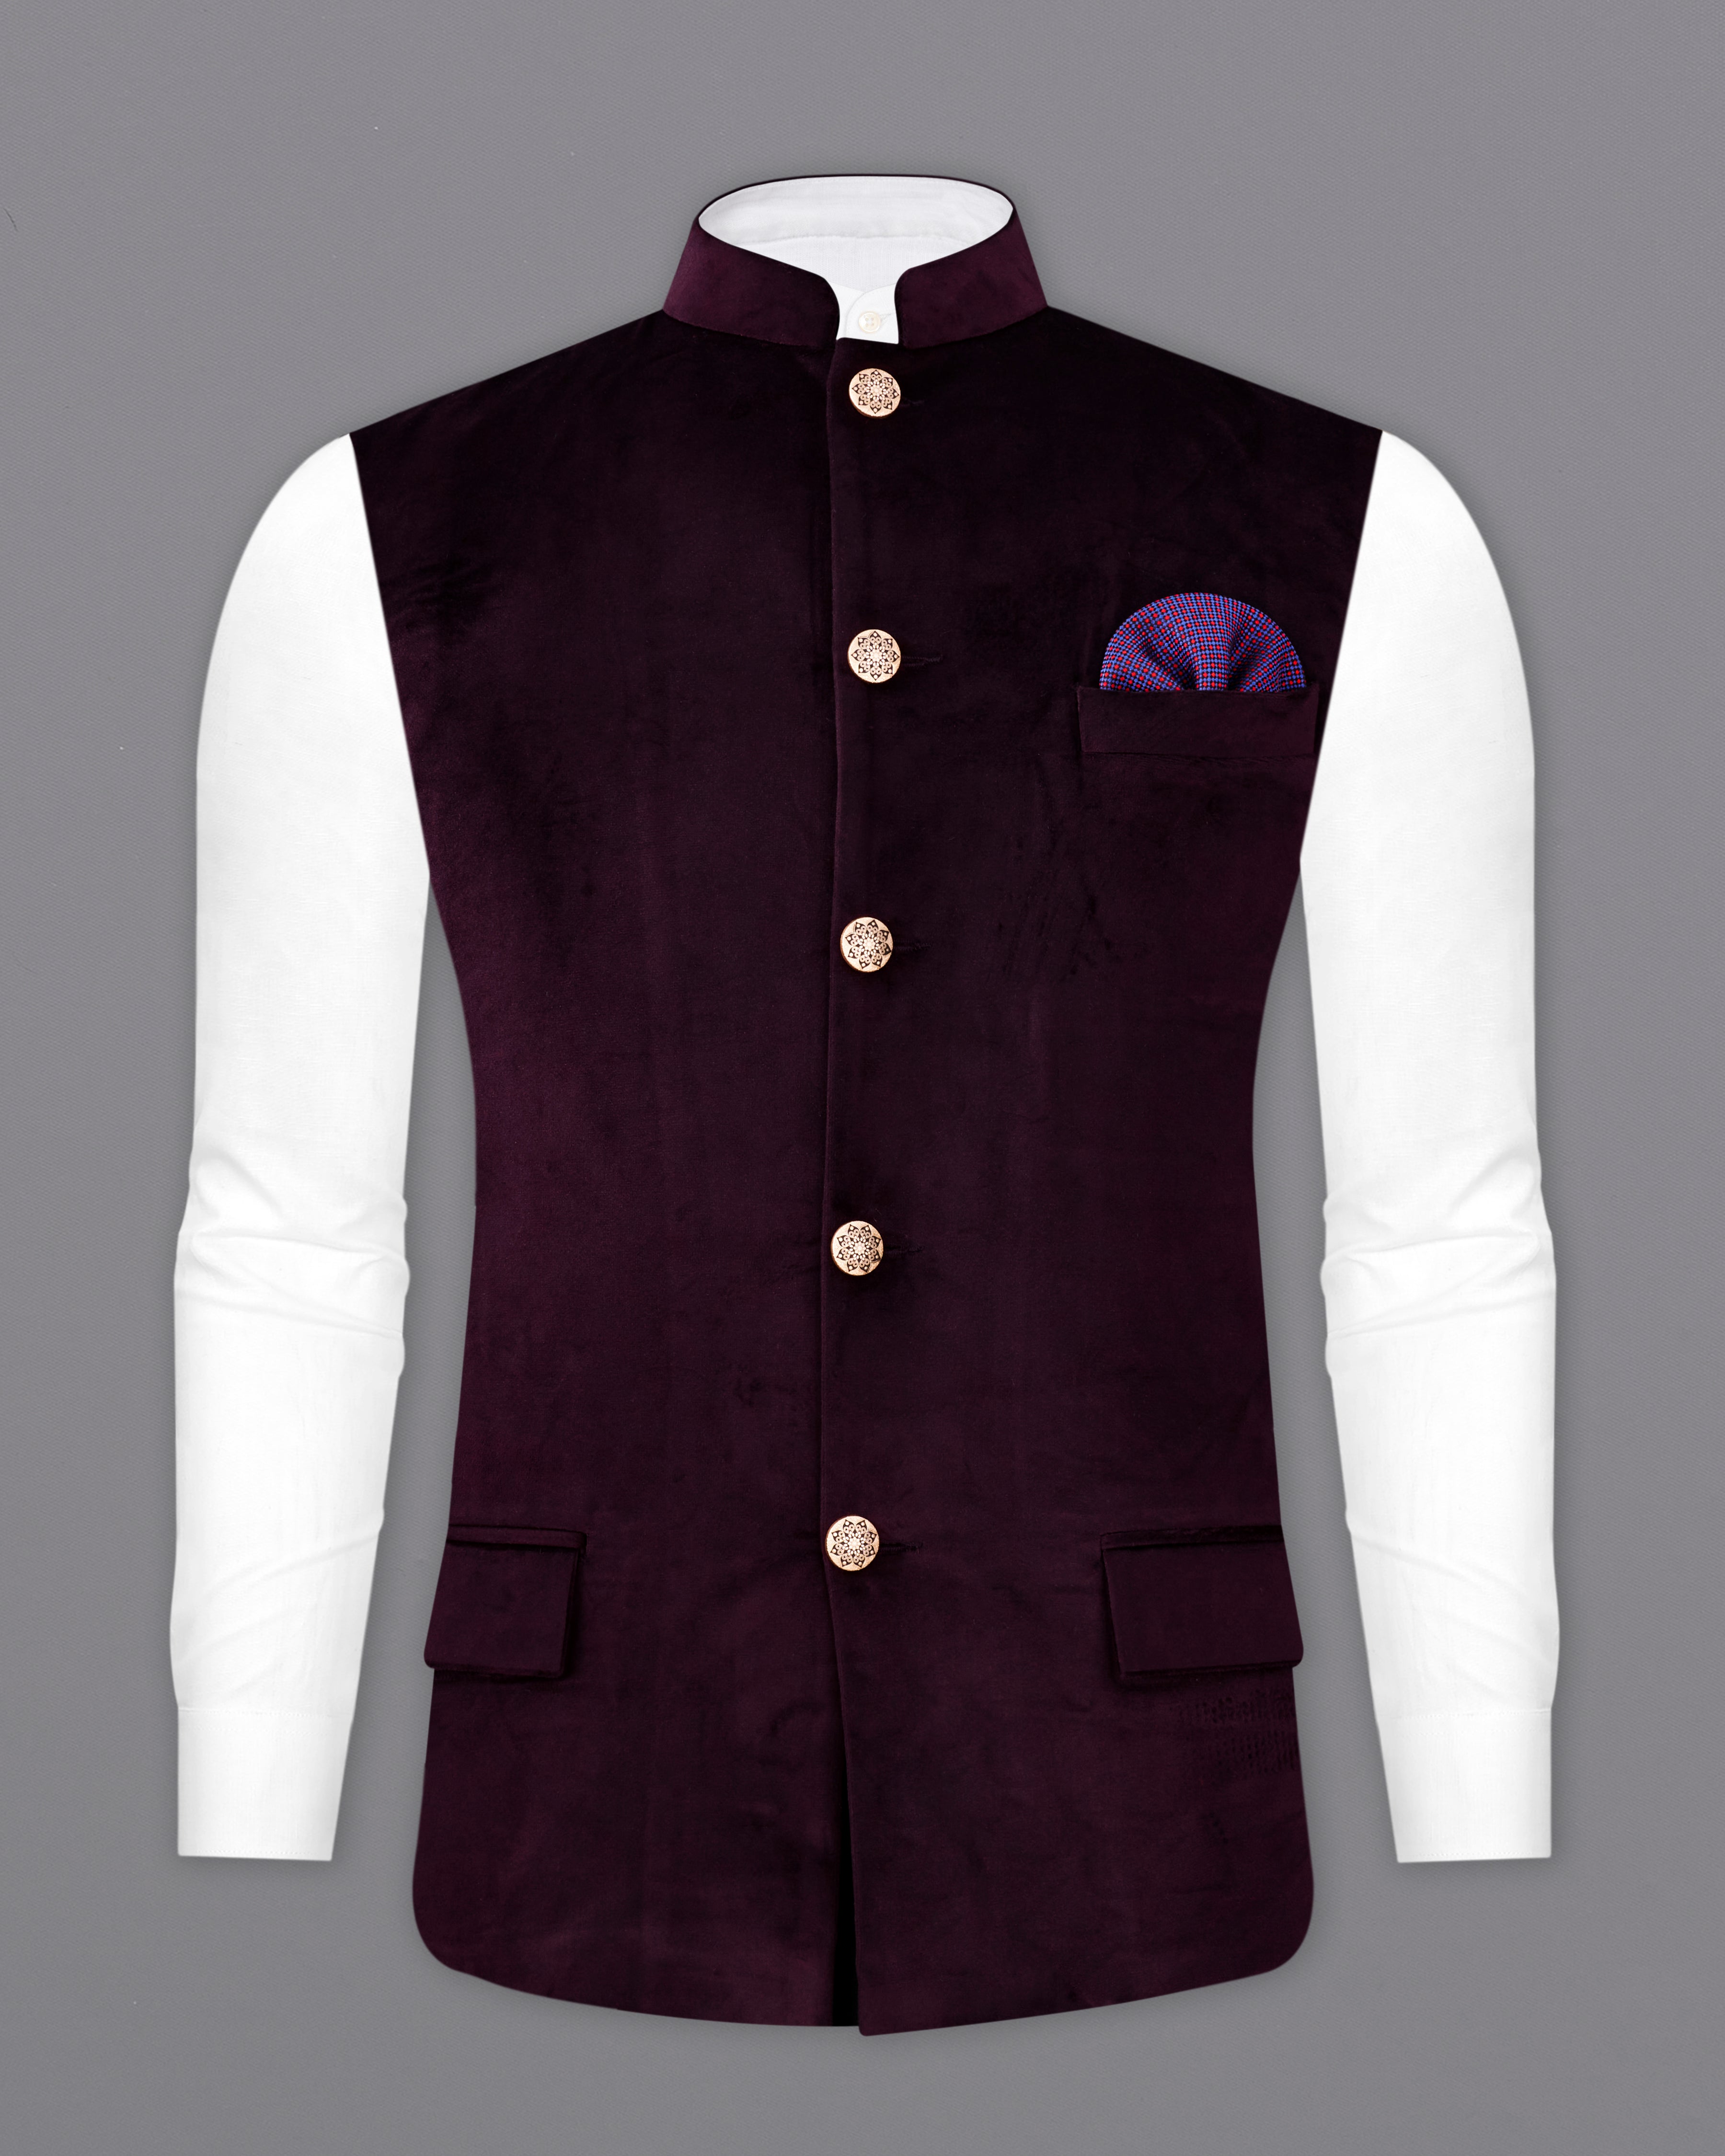 NEHRU JACKETS FOR WEDDINGS AND DIWALI | INDIAN OUTFIT IDEAS FOR MEN 2023 -  YouTube